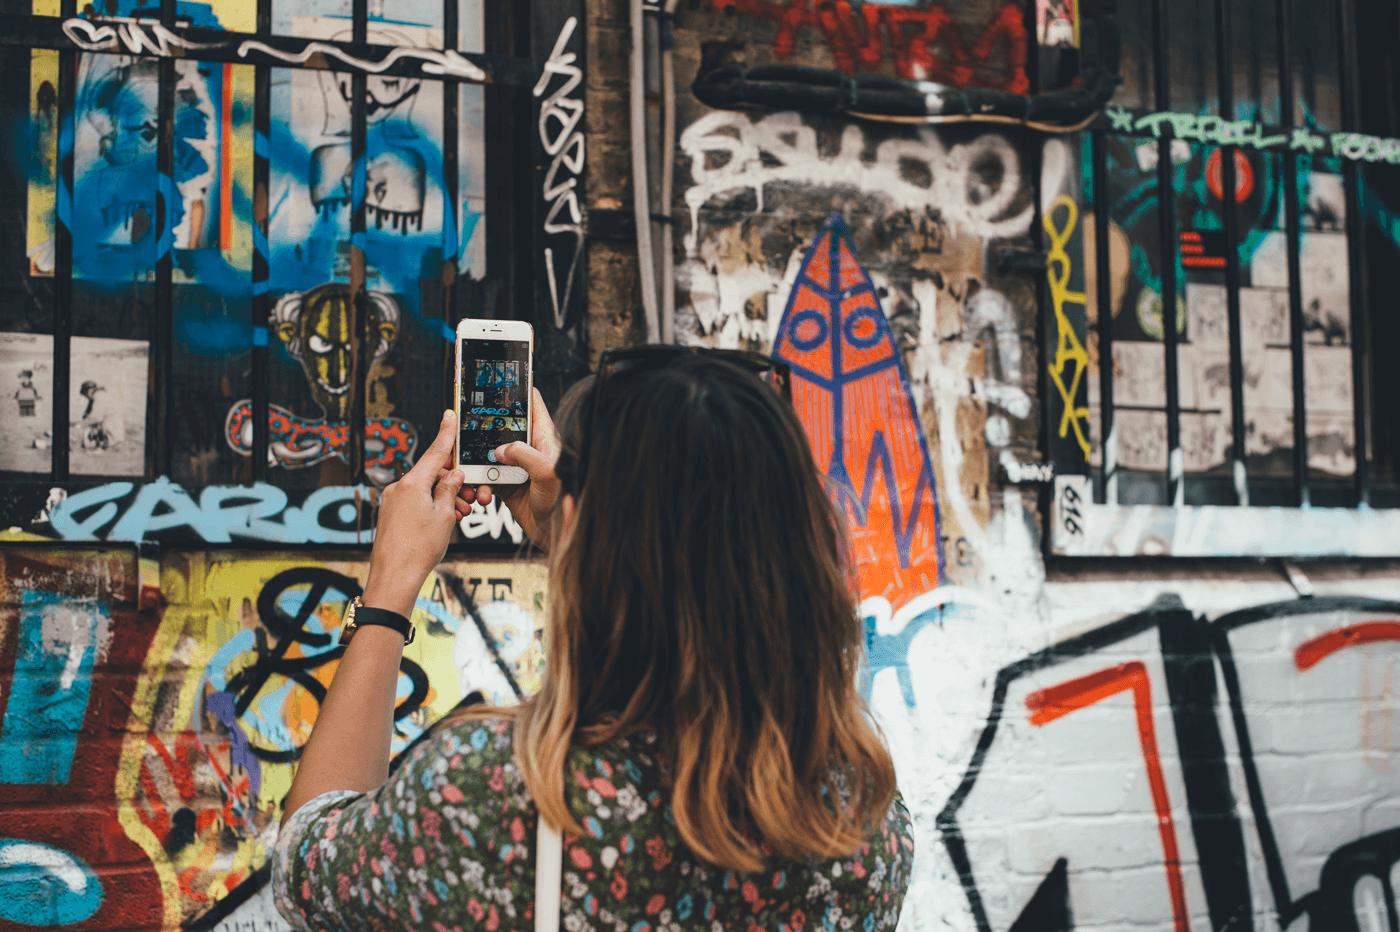 Instagram for Business: 30 Tips to Grow Your Audience and Stand Out on Instagram